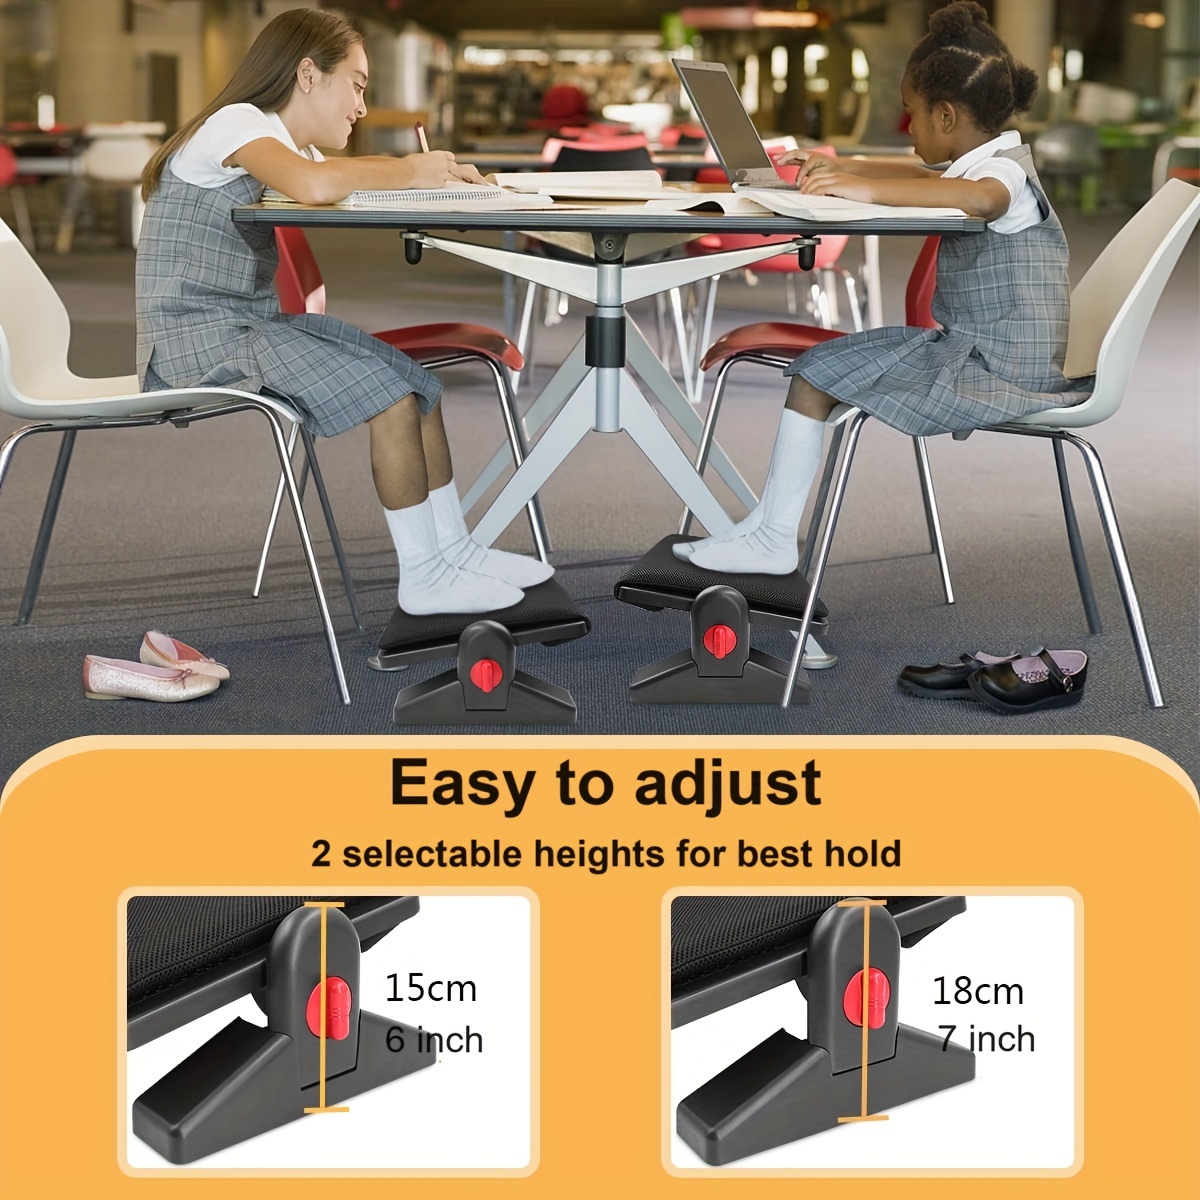 What Is The Best Angle for an Office Footrest?